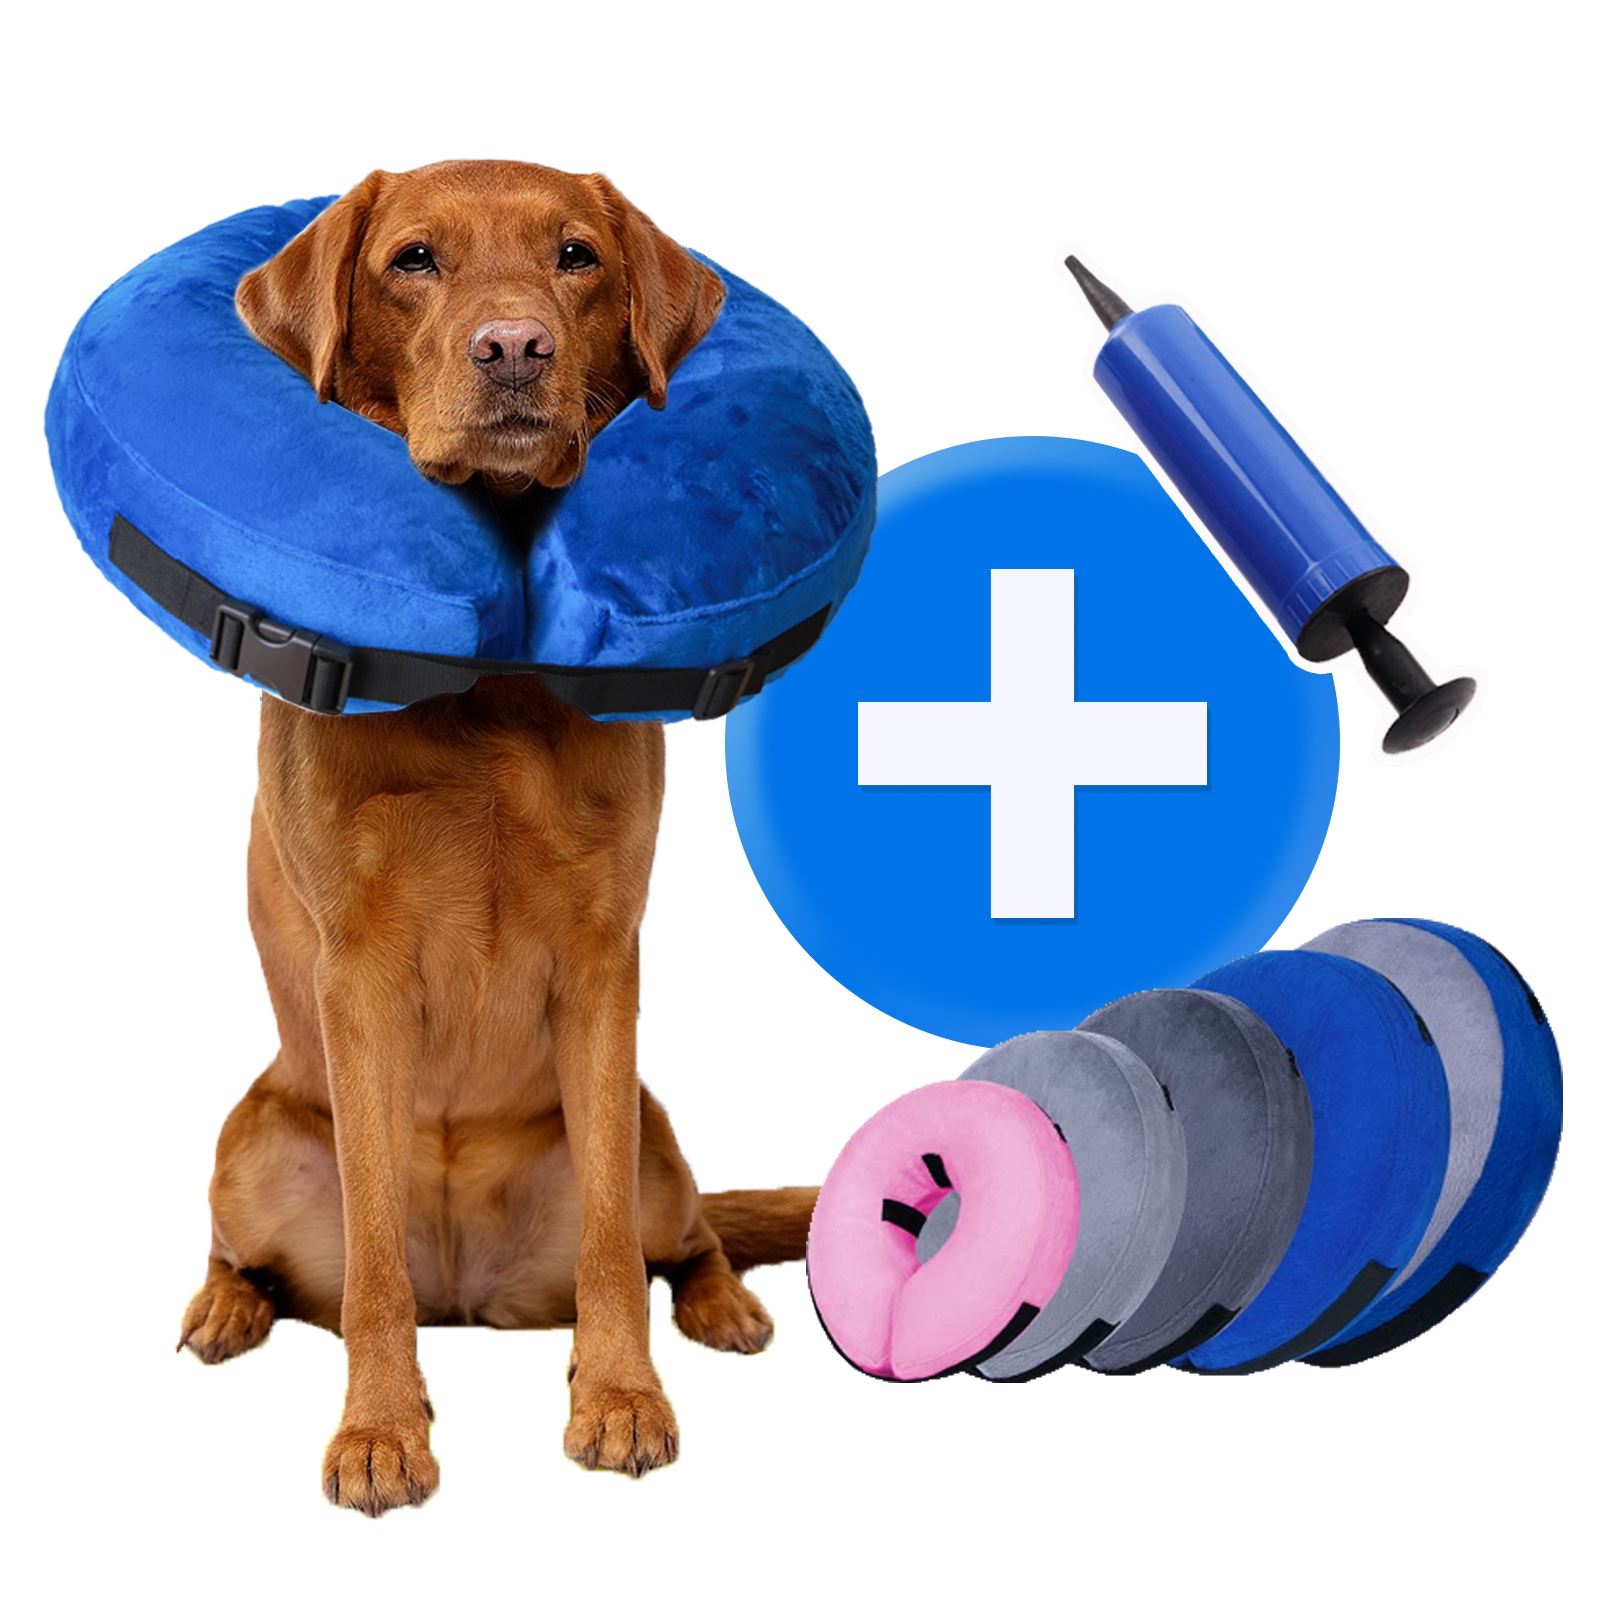 Customized Inflatable Pet donut collar soft dog cone alternative after surgery dog cones for small medium large dogs